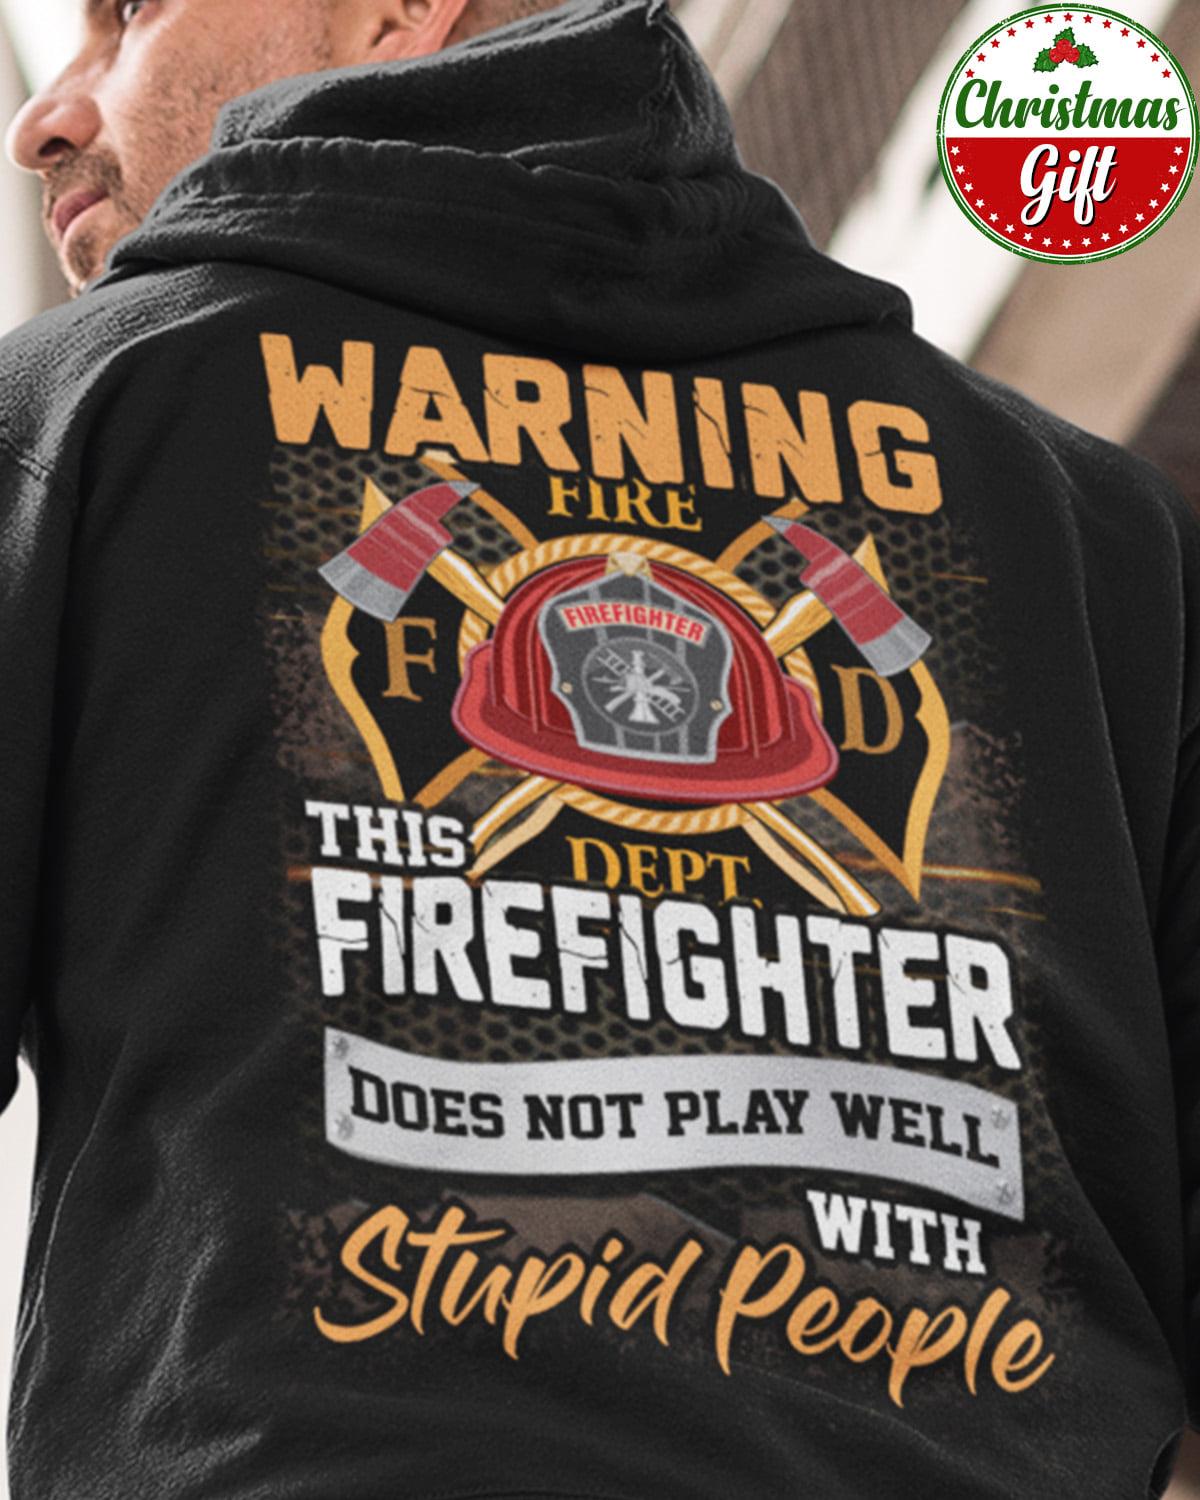 Warning this firefighter does not play well with stupid people - Gift for firefighter, firefighter job T-shirt